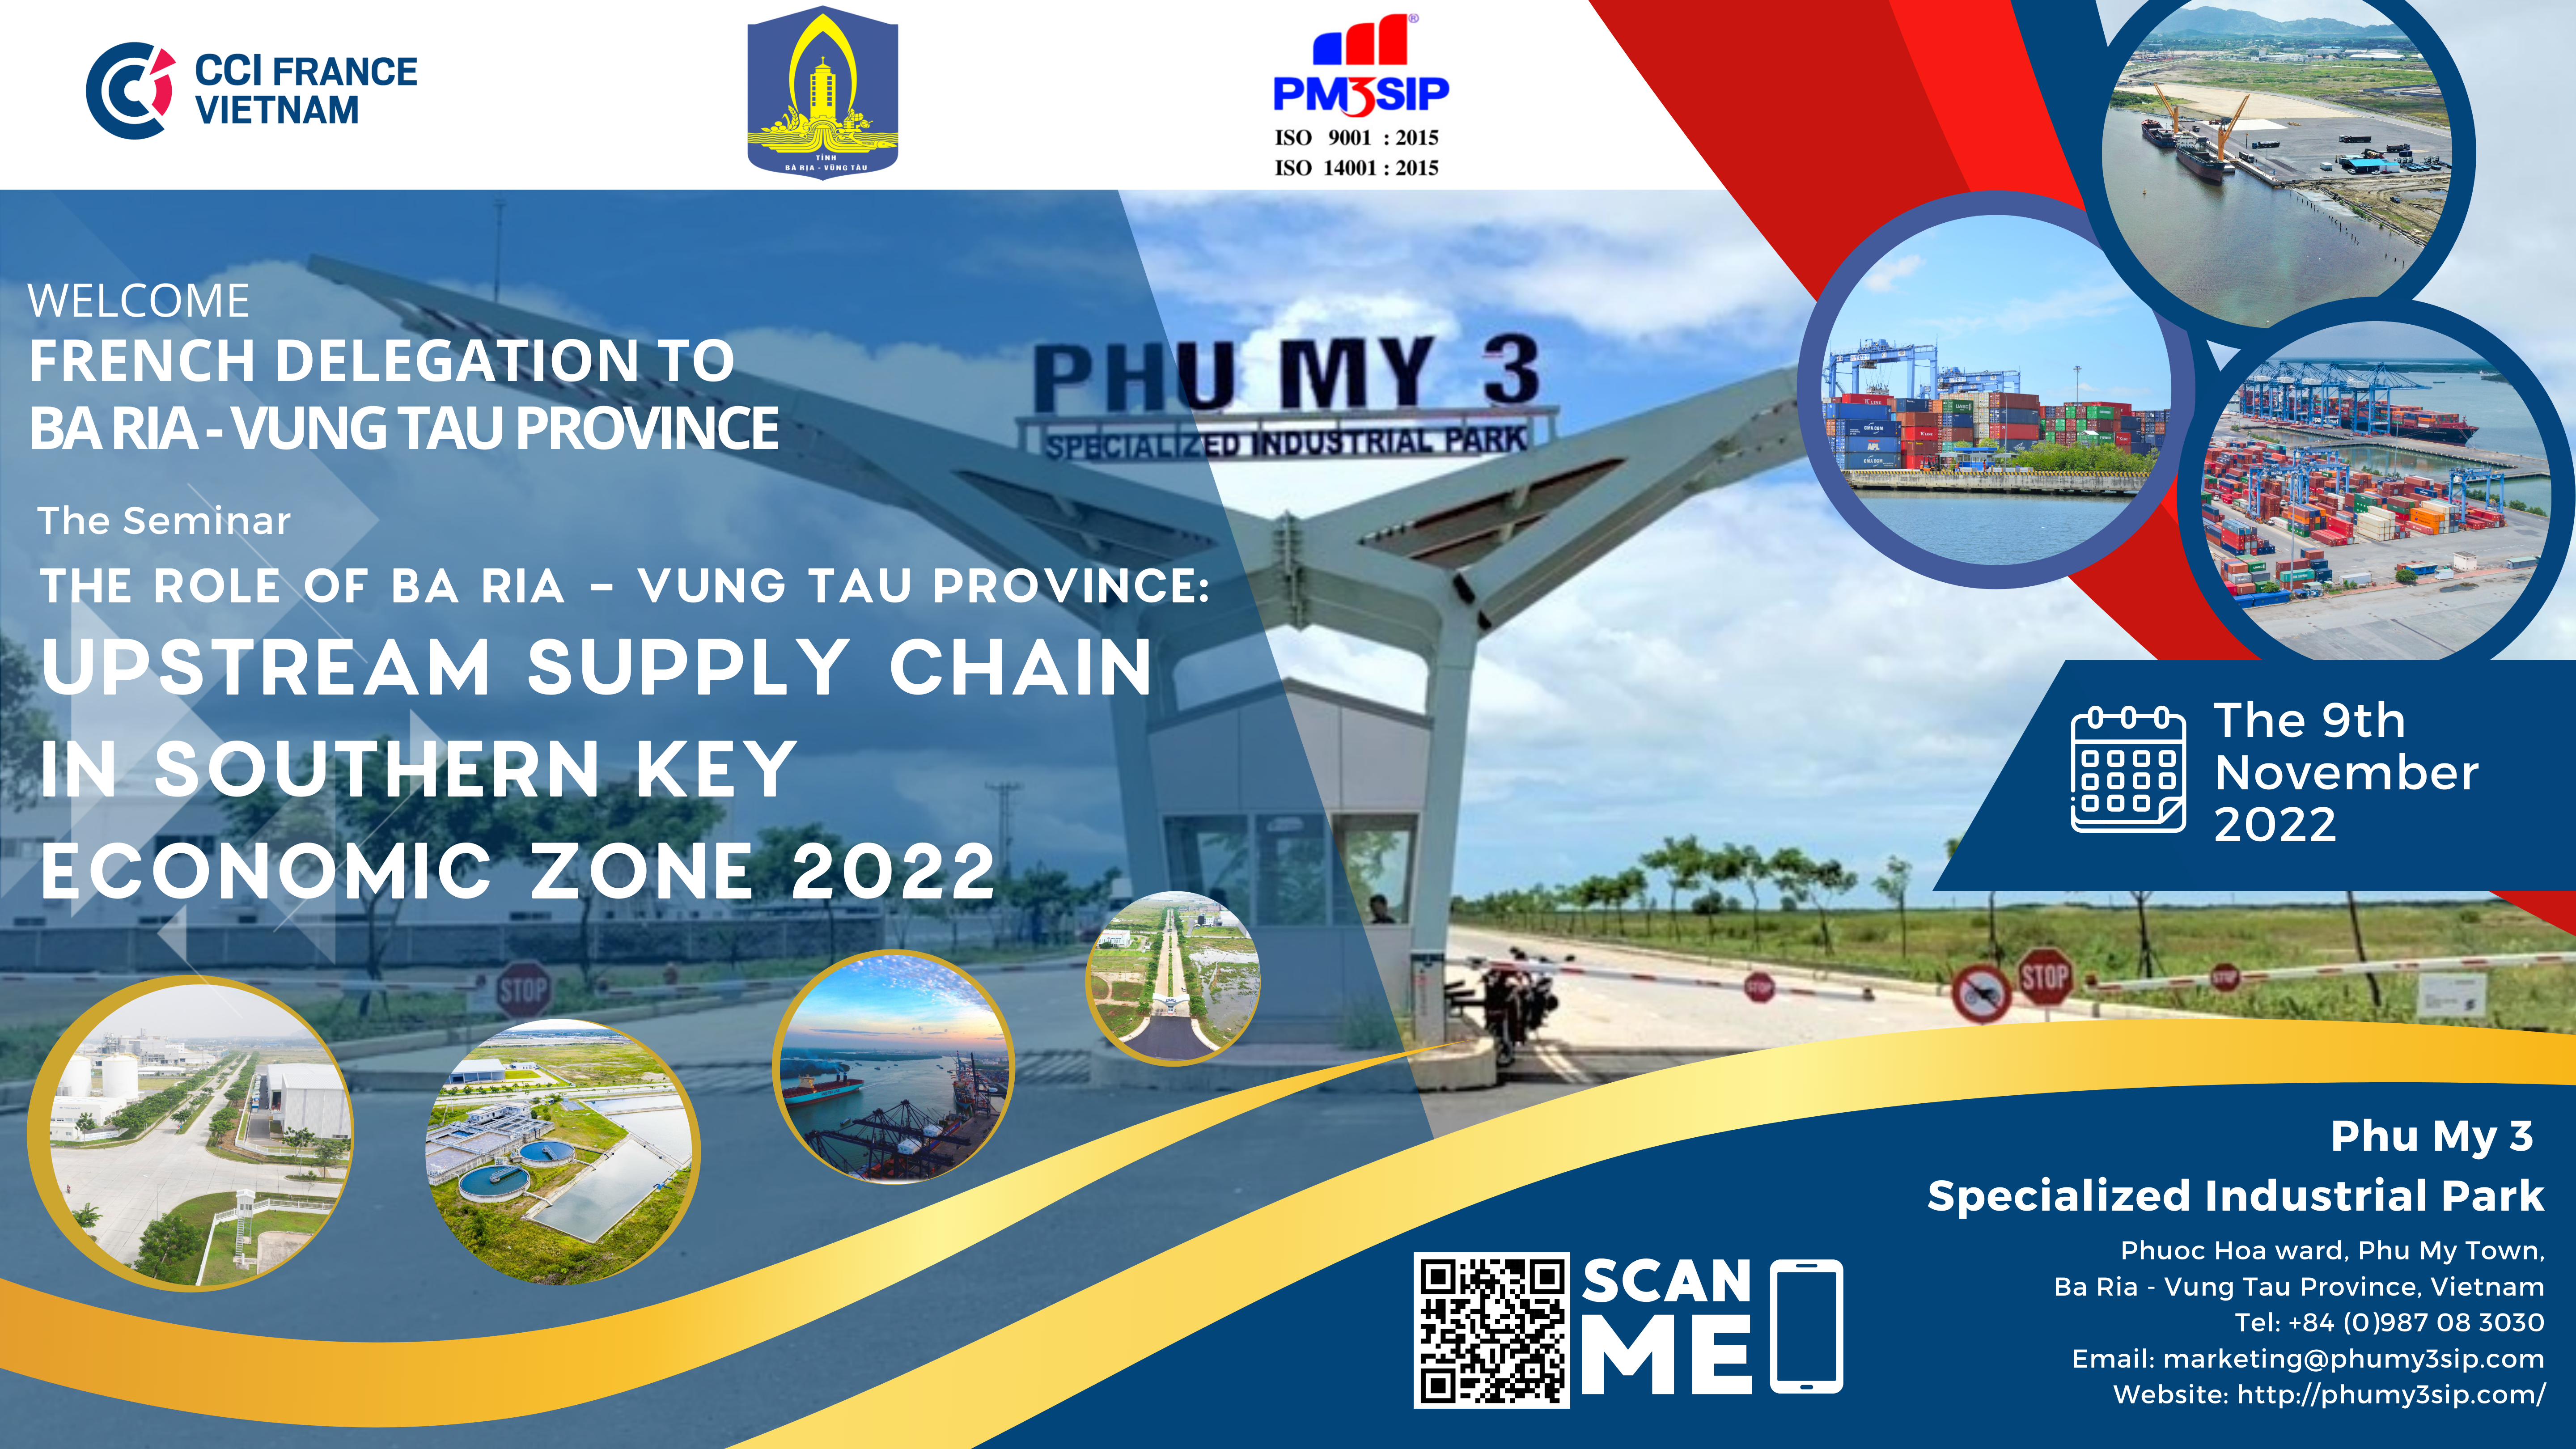 THE ROLE OF BRVT PROVINCE: SUPPLY CHAIN IN SOUTHERN KEY ECONOMIC ZONE 2022